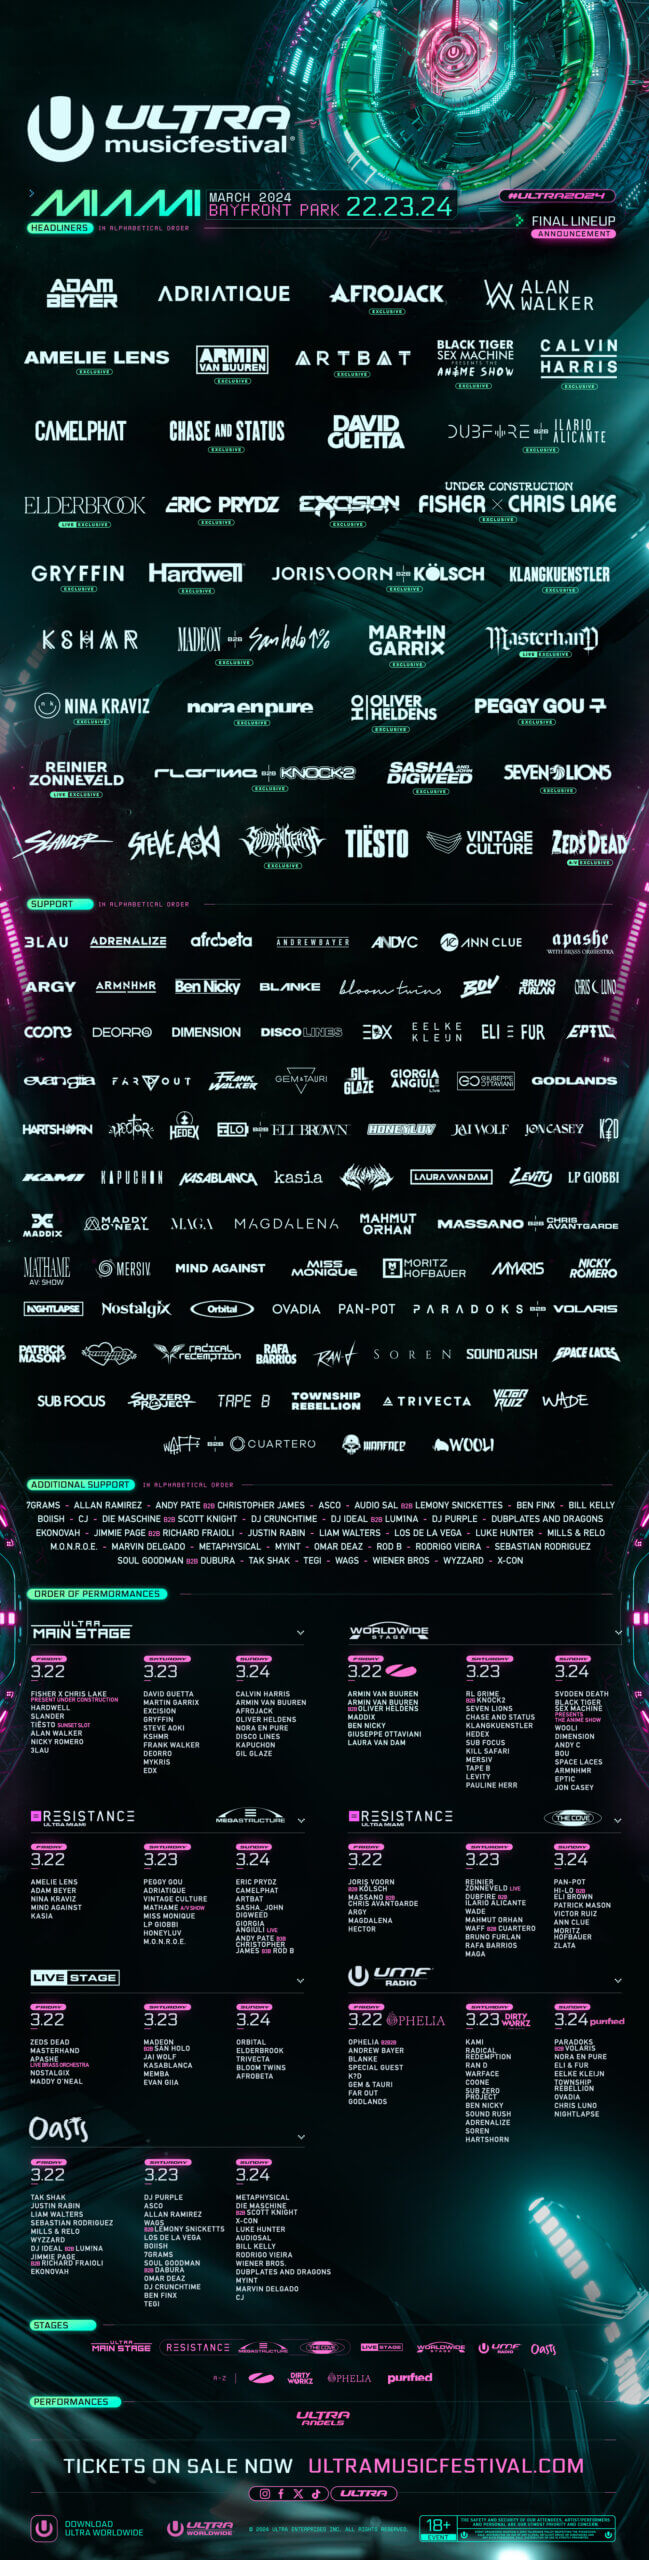 Ultra Yacht Experience - Ultra Music Festival March 22, 23, 24 - 2024